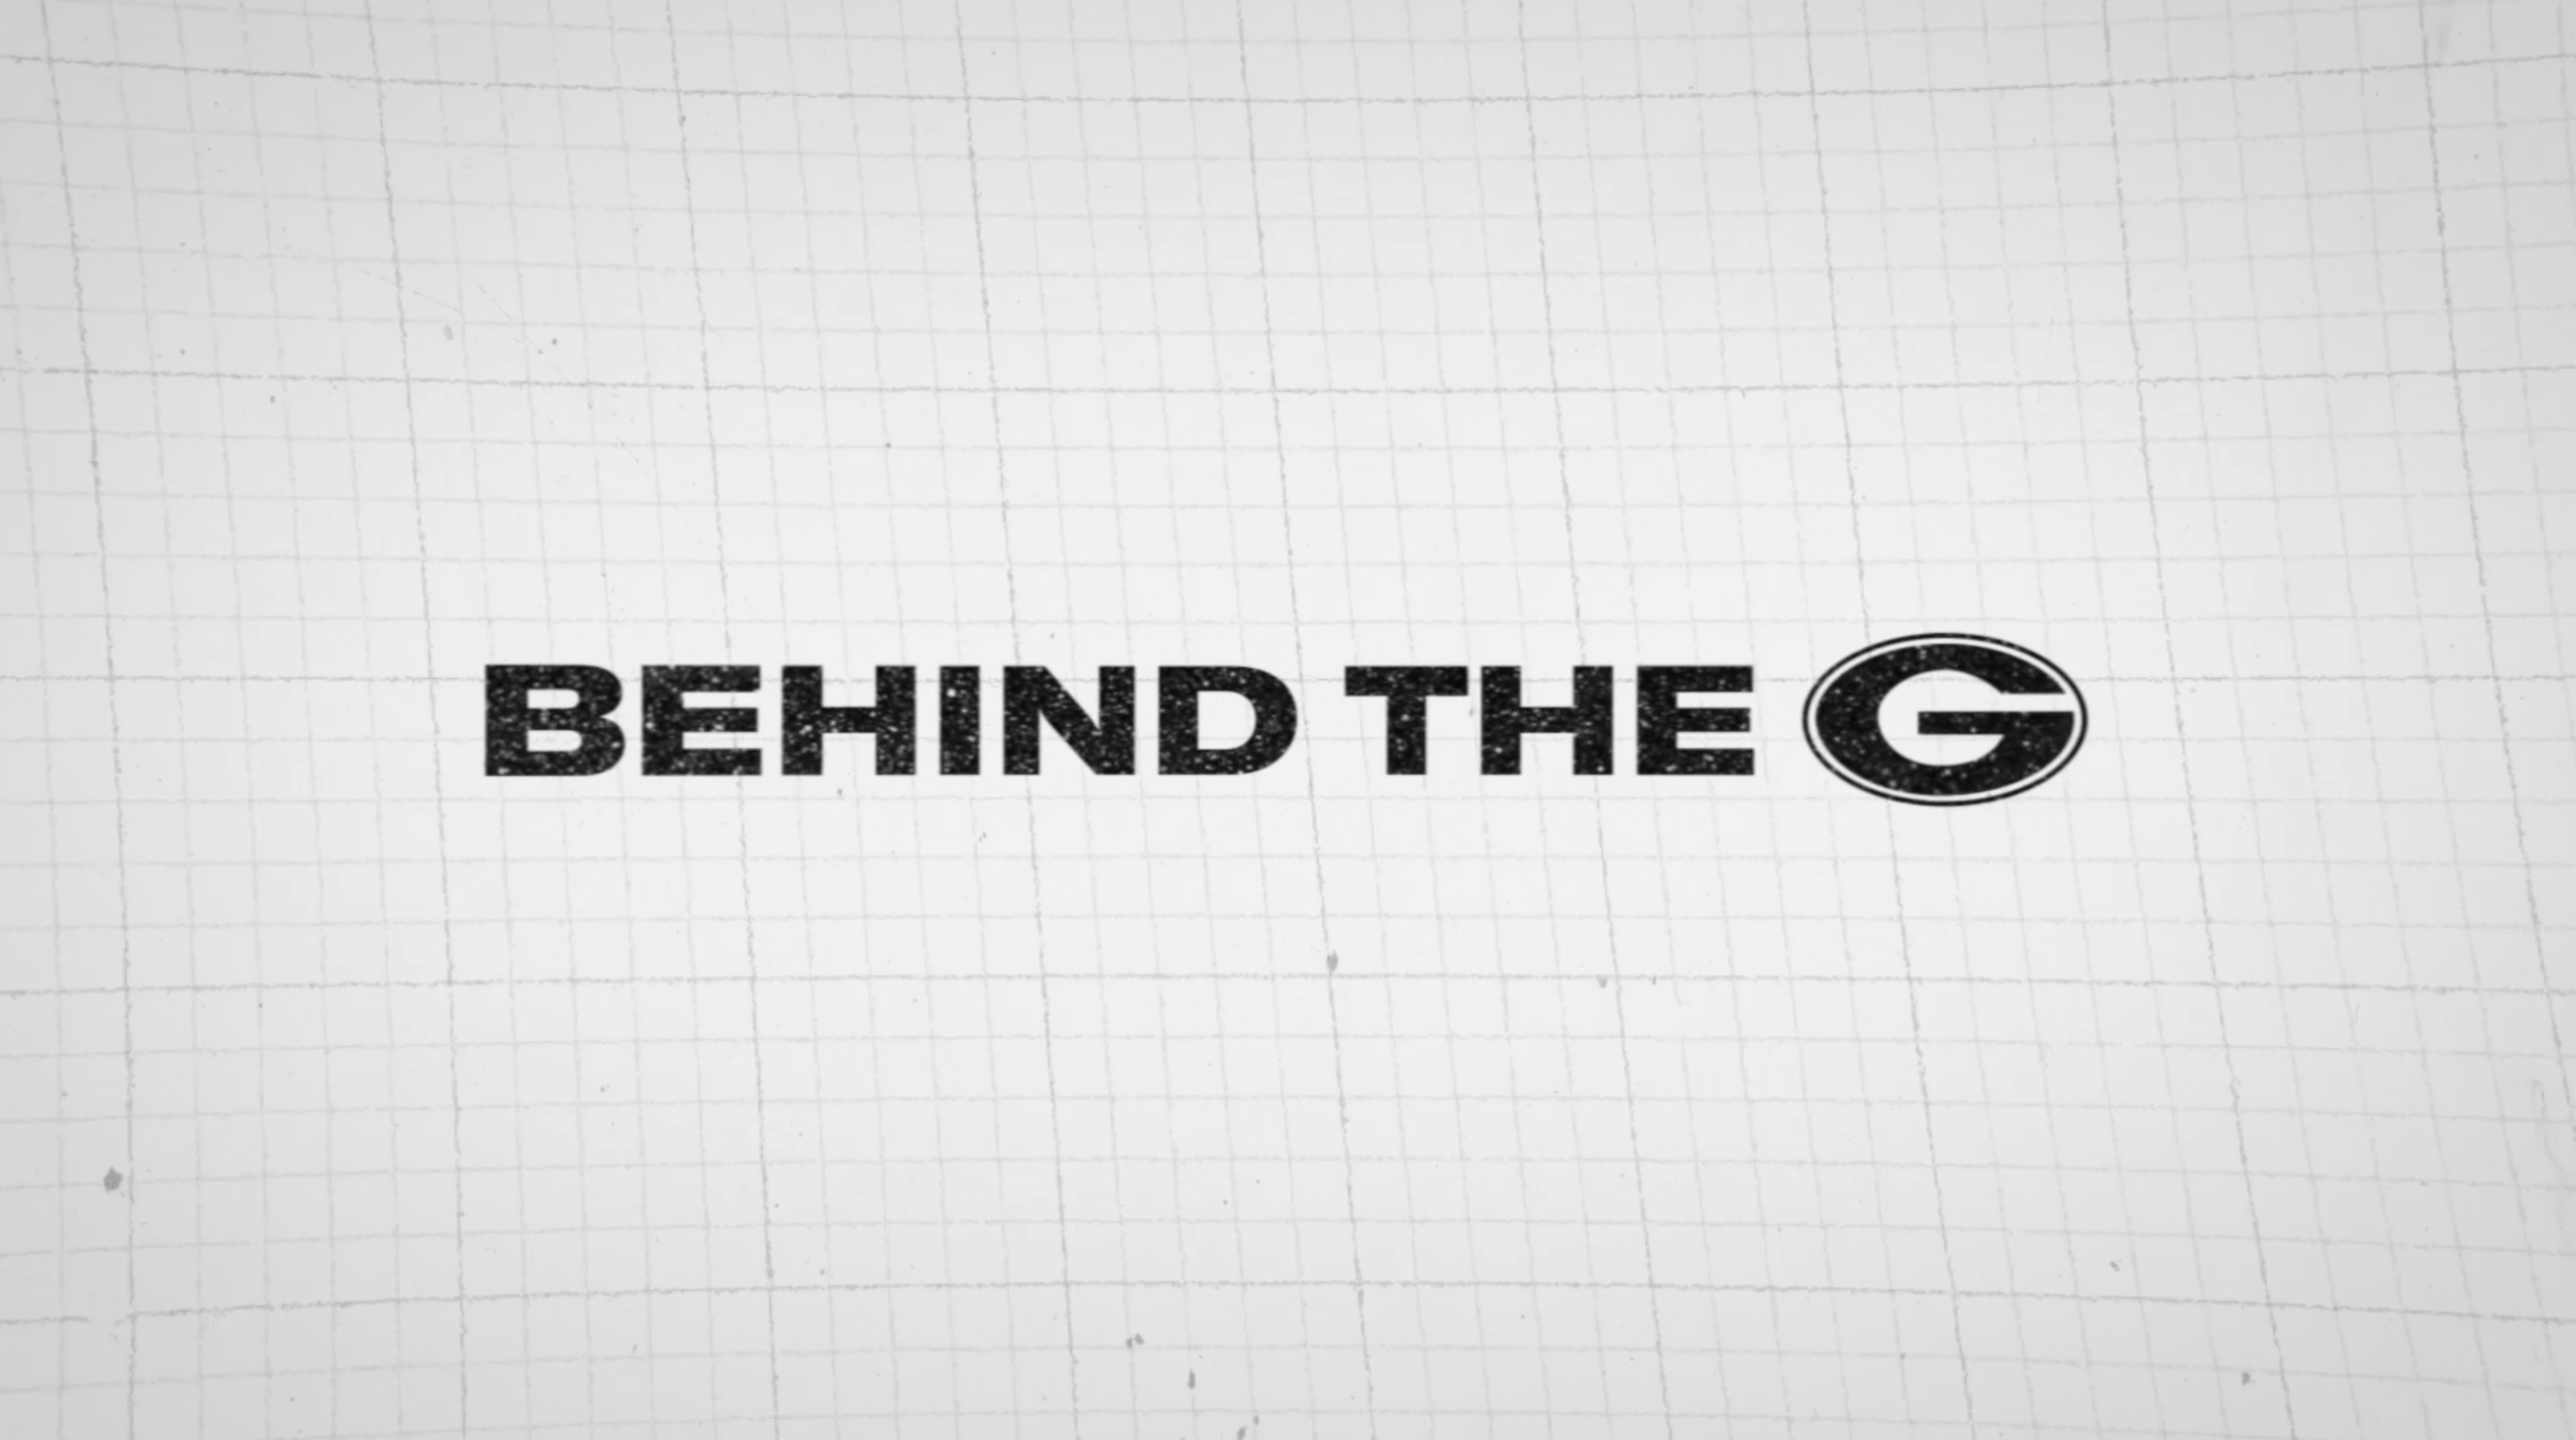 Thumbnail from title sequence of a Behind The G video